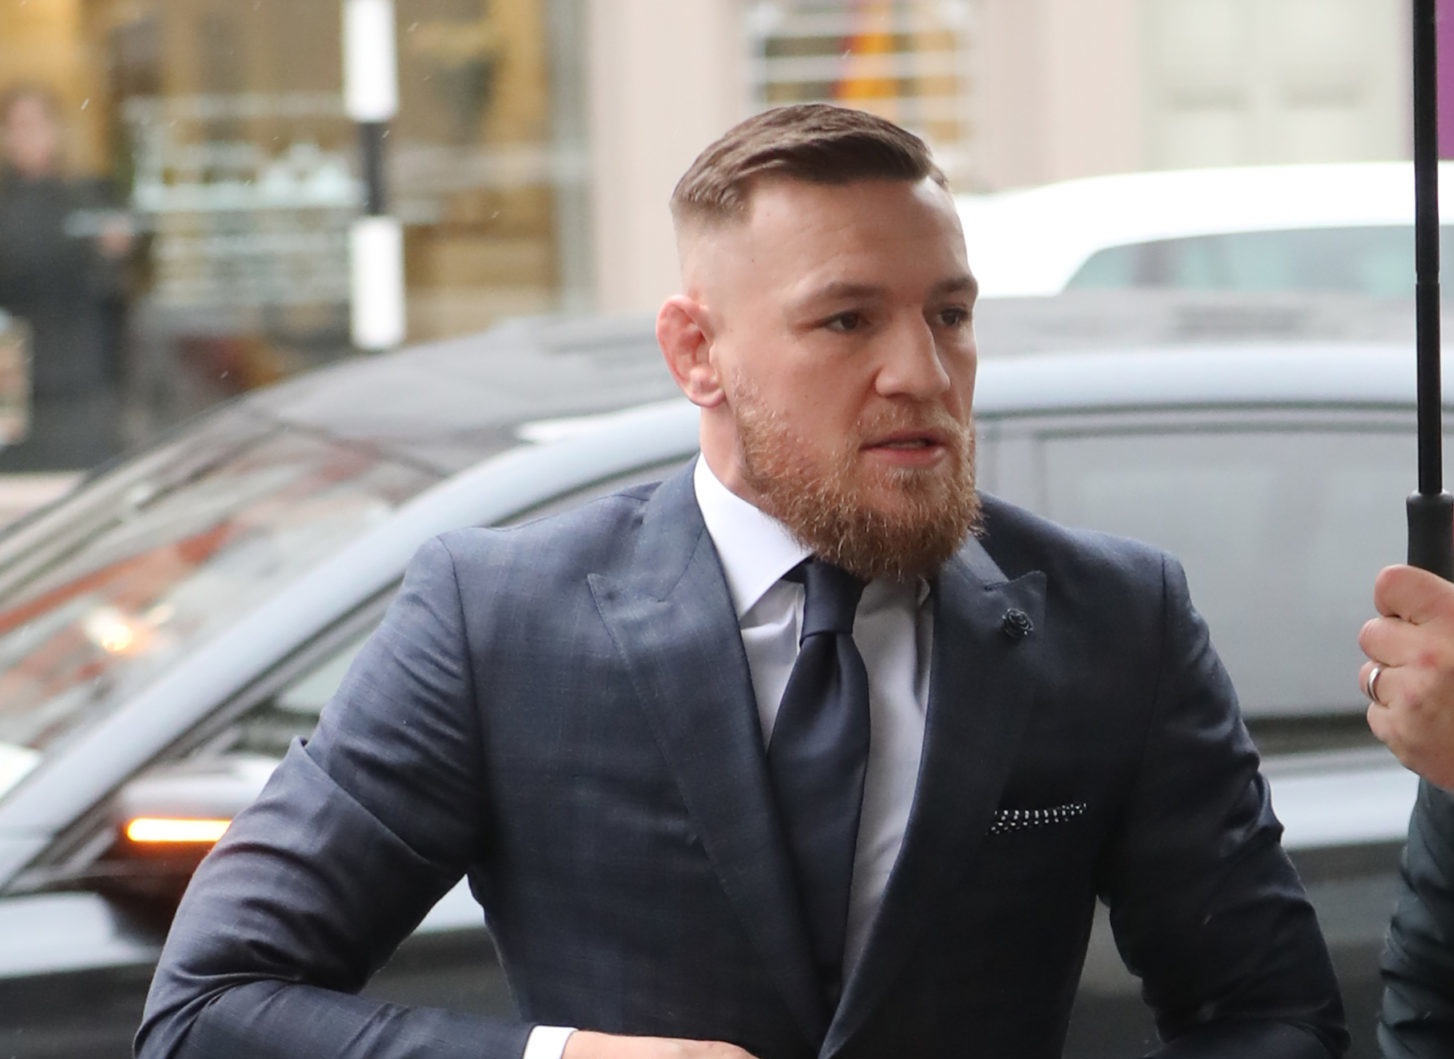 Conor Mcgregor Fined €1000 Over Assault In Dublin Pub Spinsouthwest